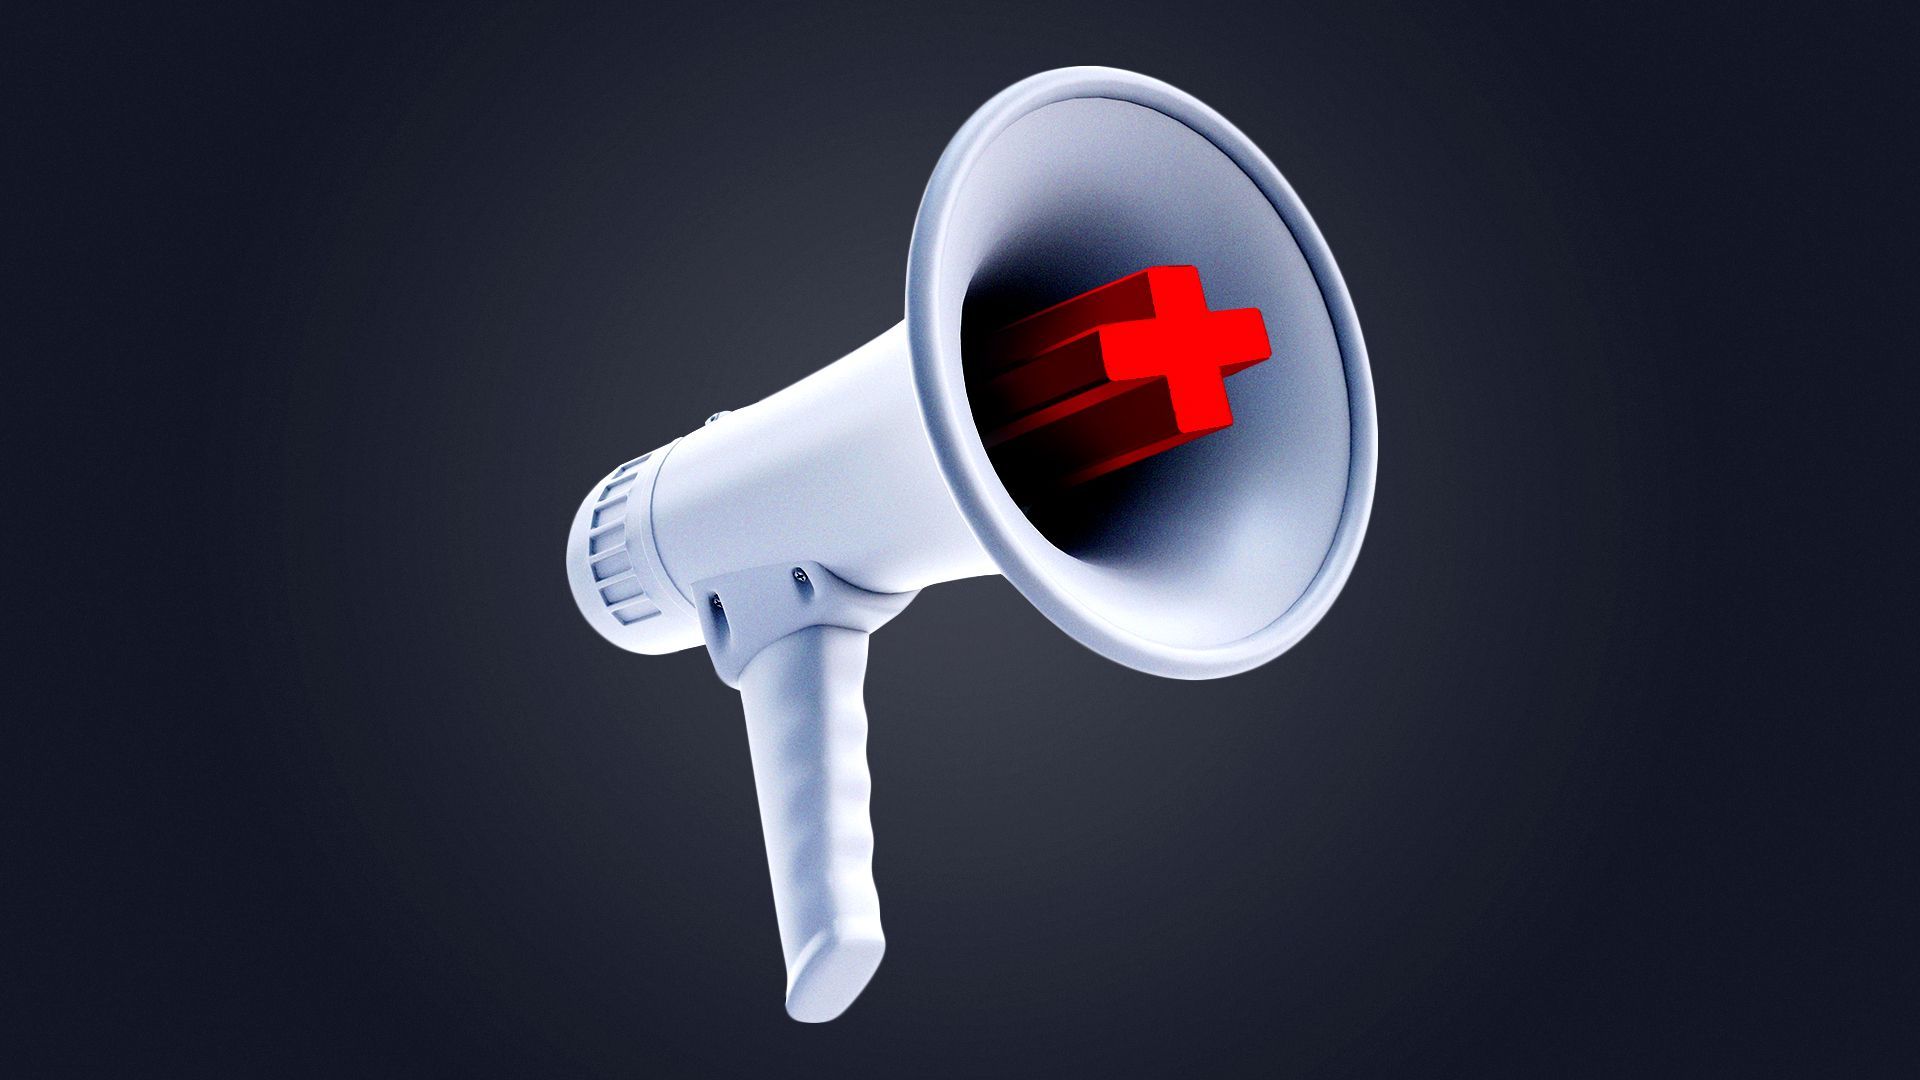 Illustration of a megaphone with a red cross in the center